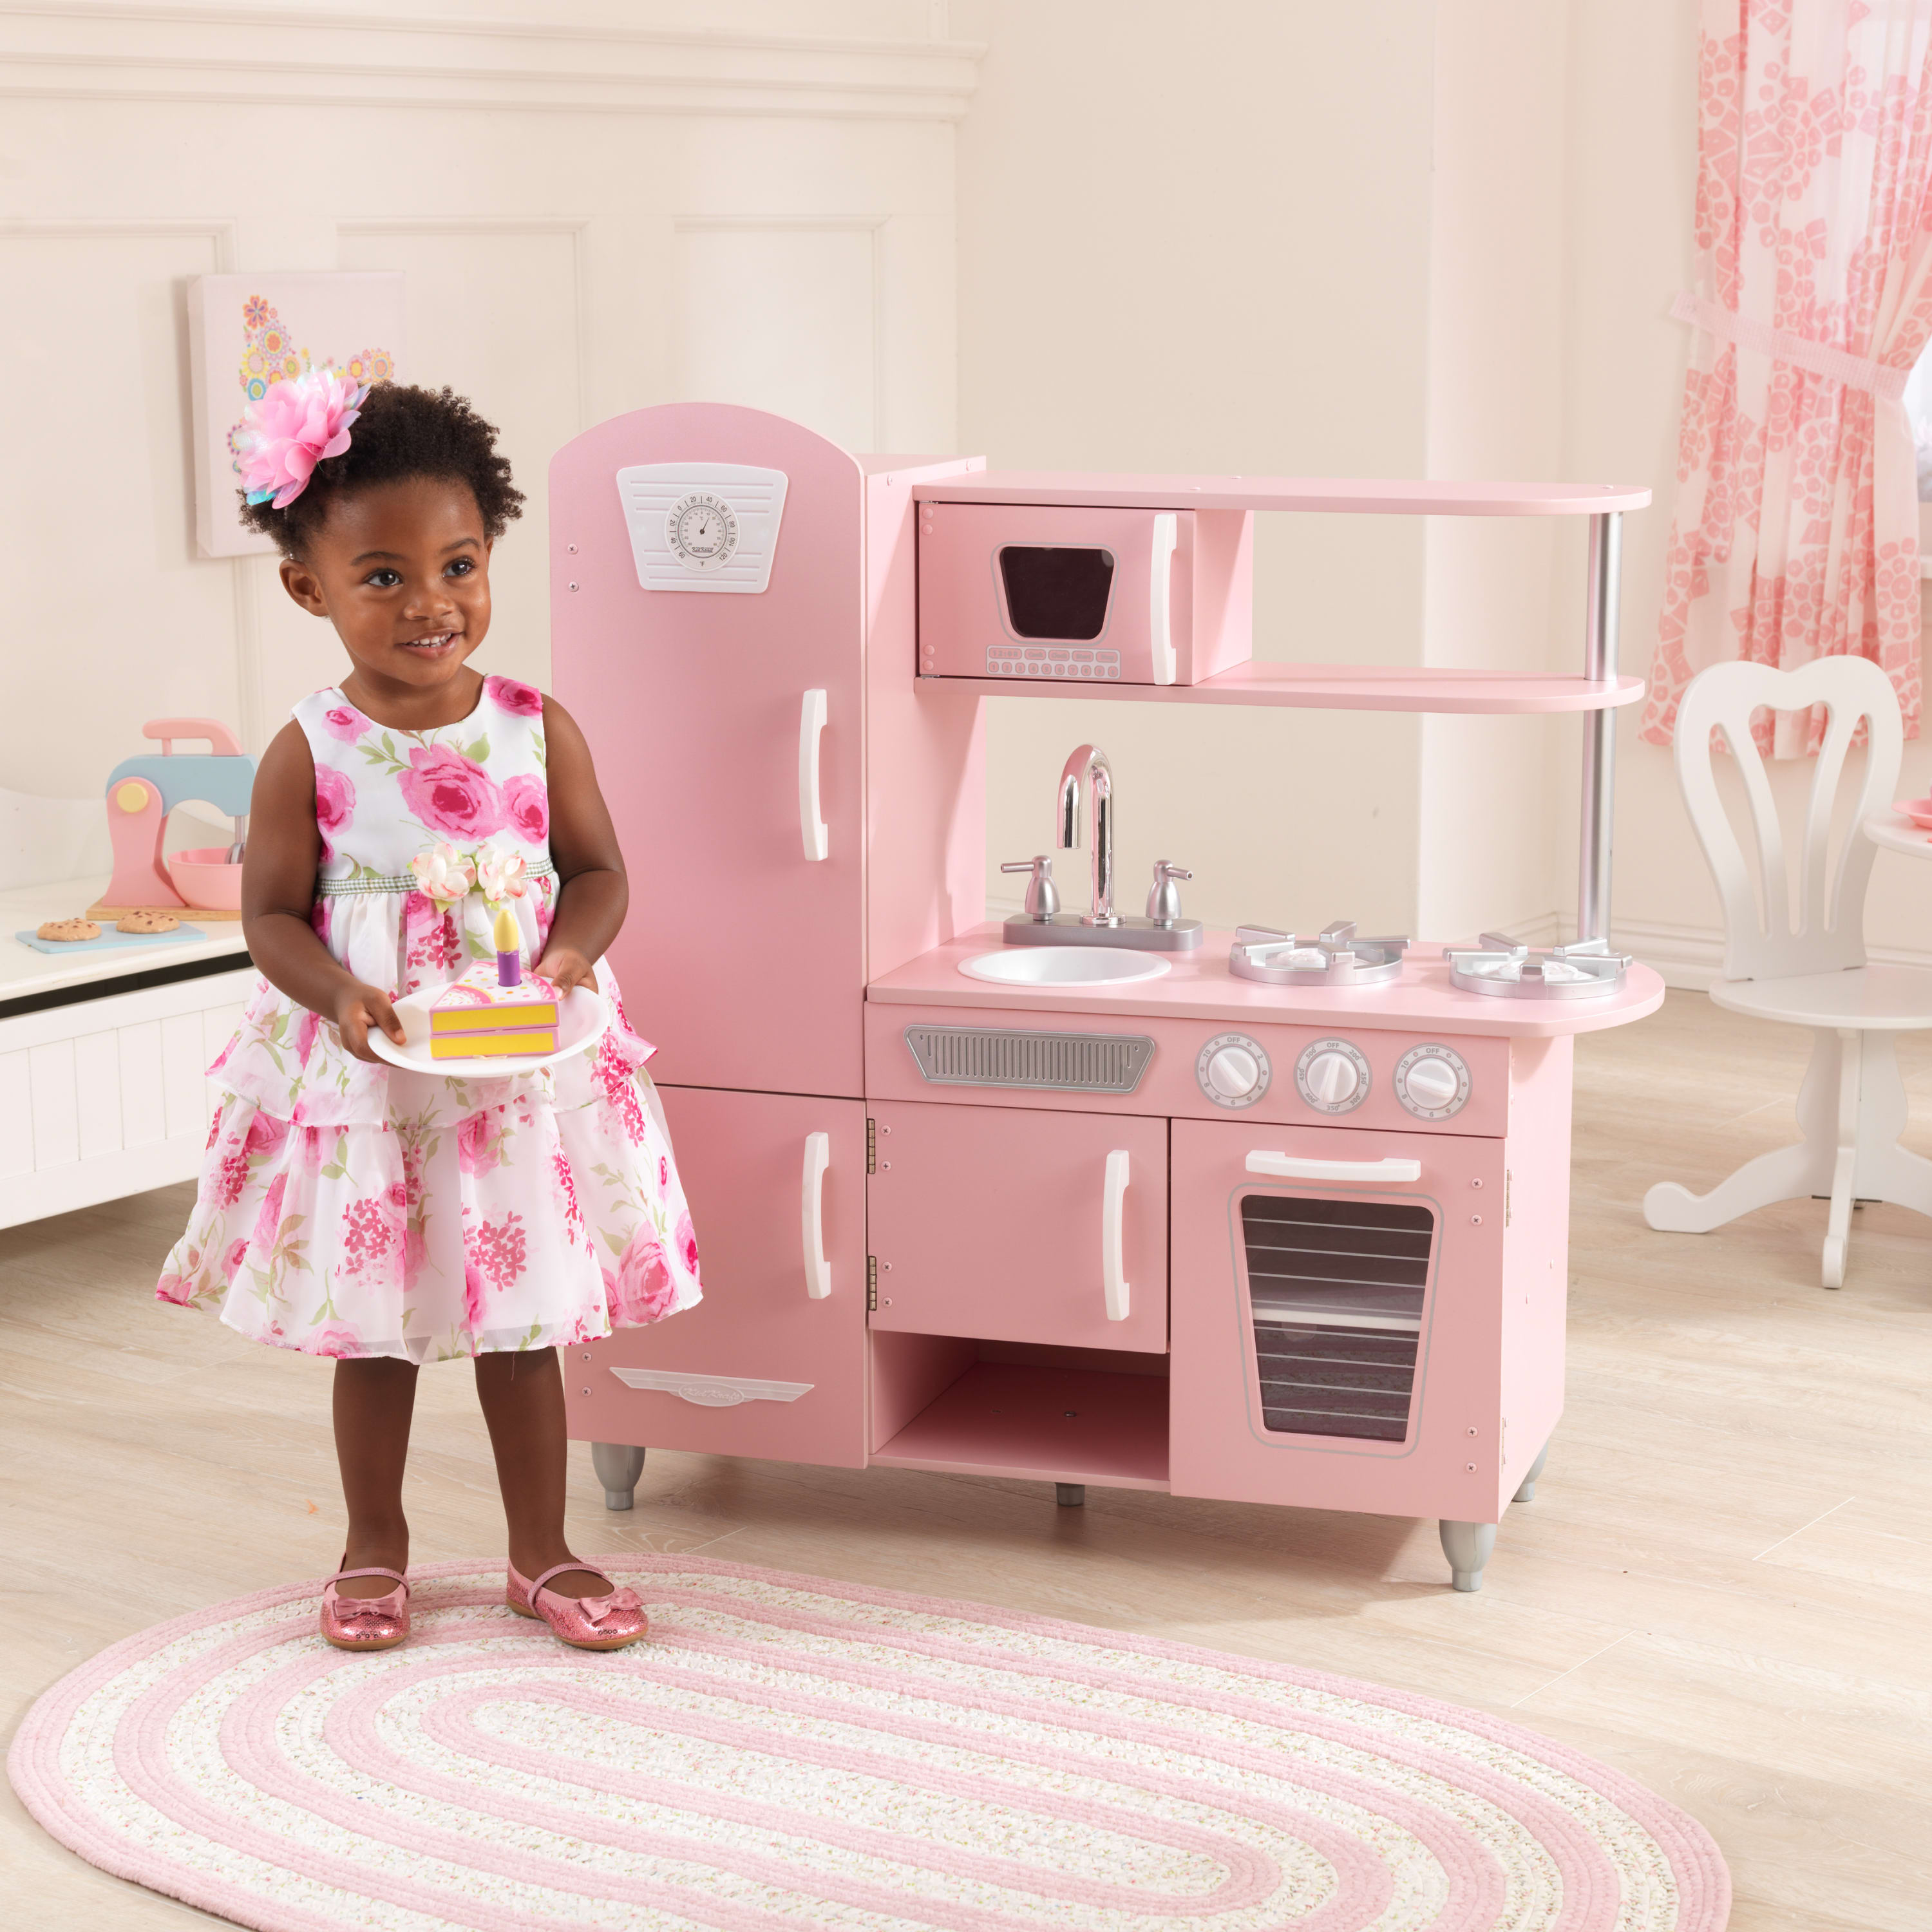 KidKraft Vintage Wooden Play Kitchen with Working Knobs, Pink - image 4 of 7